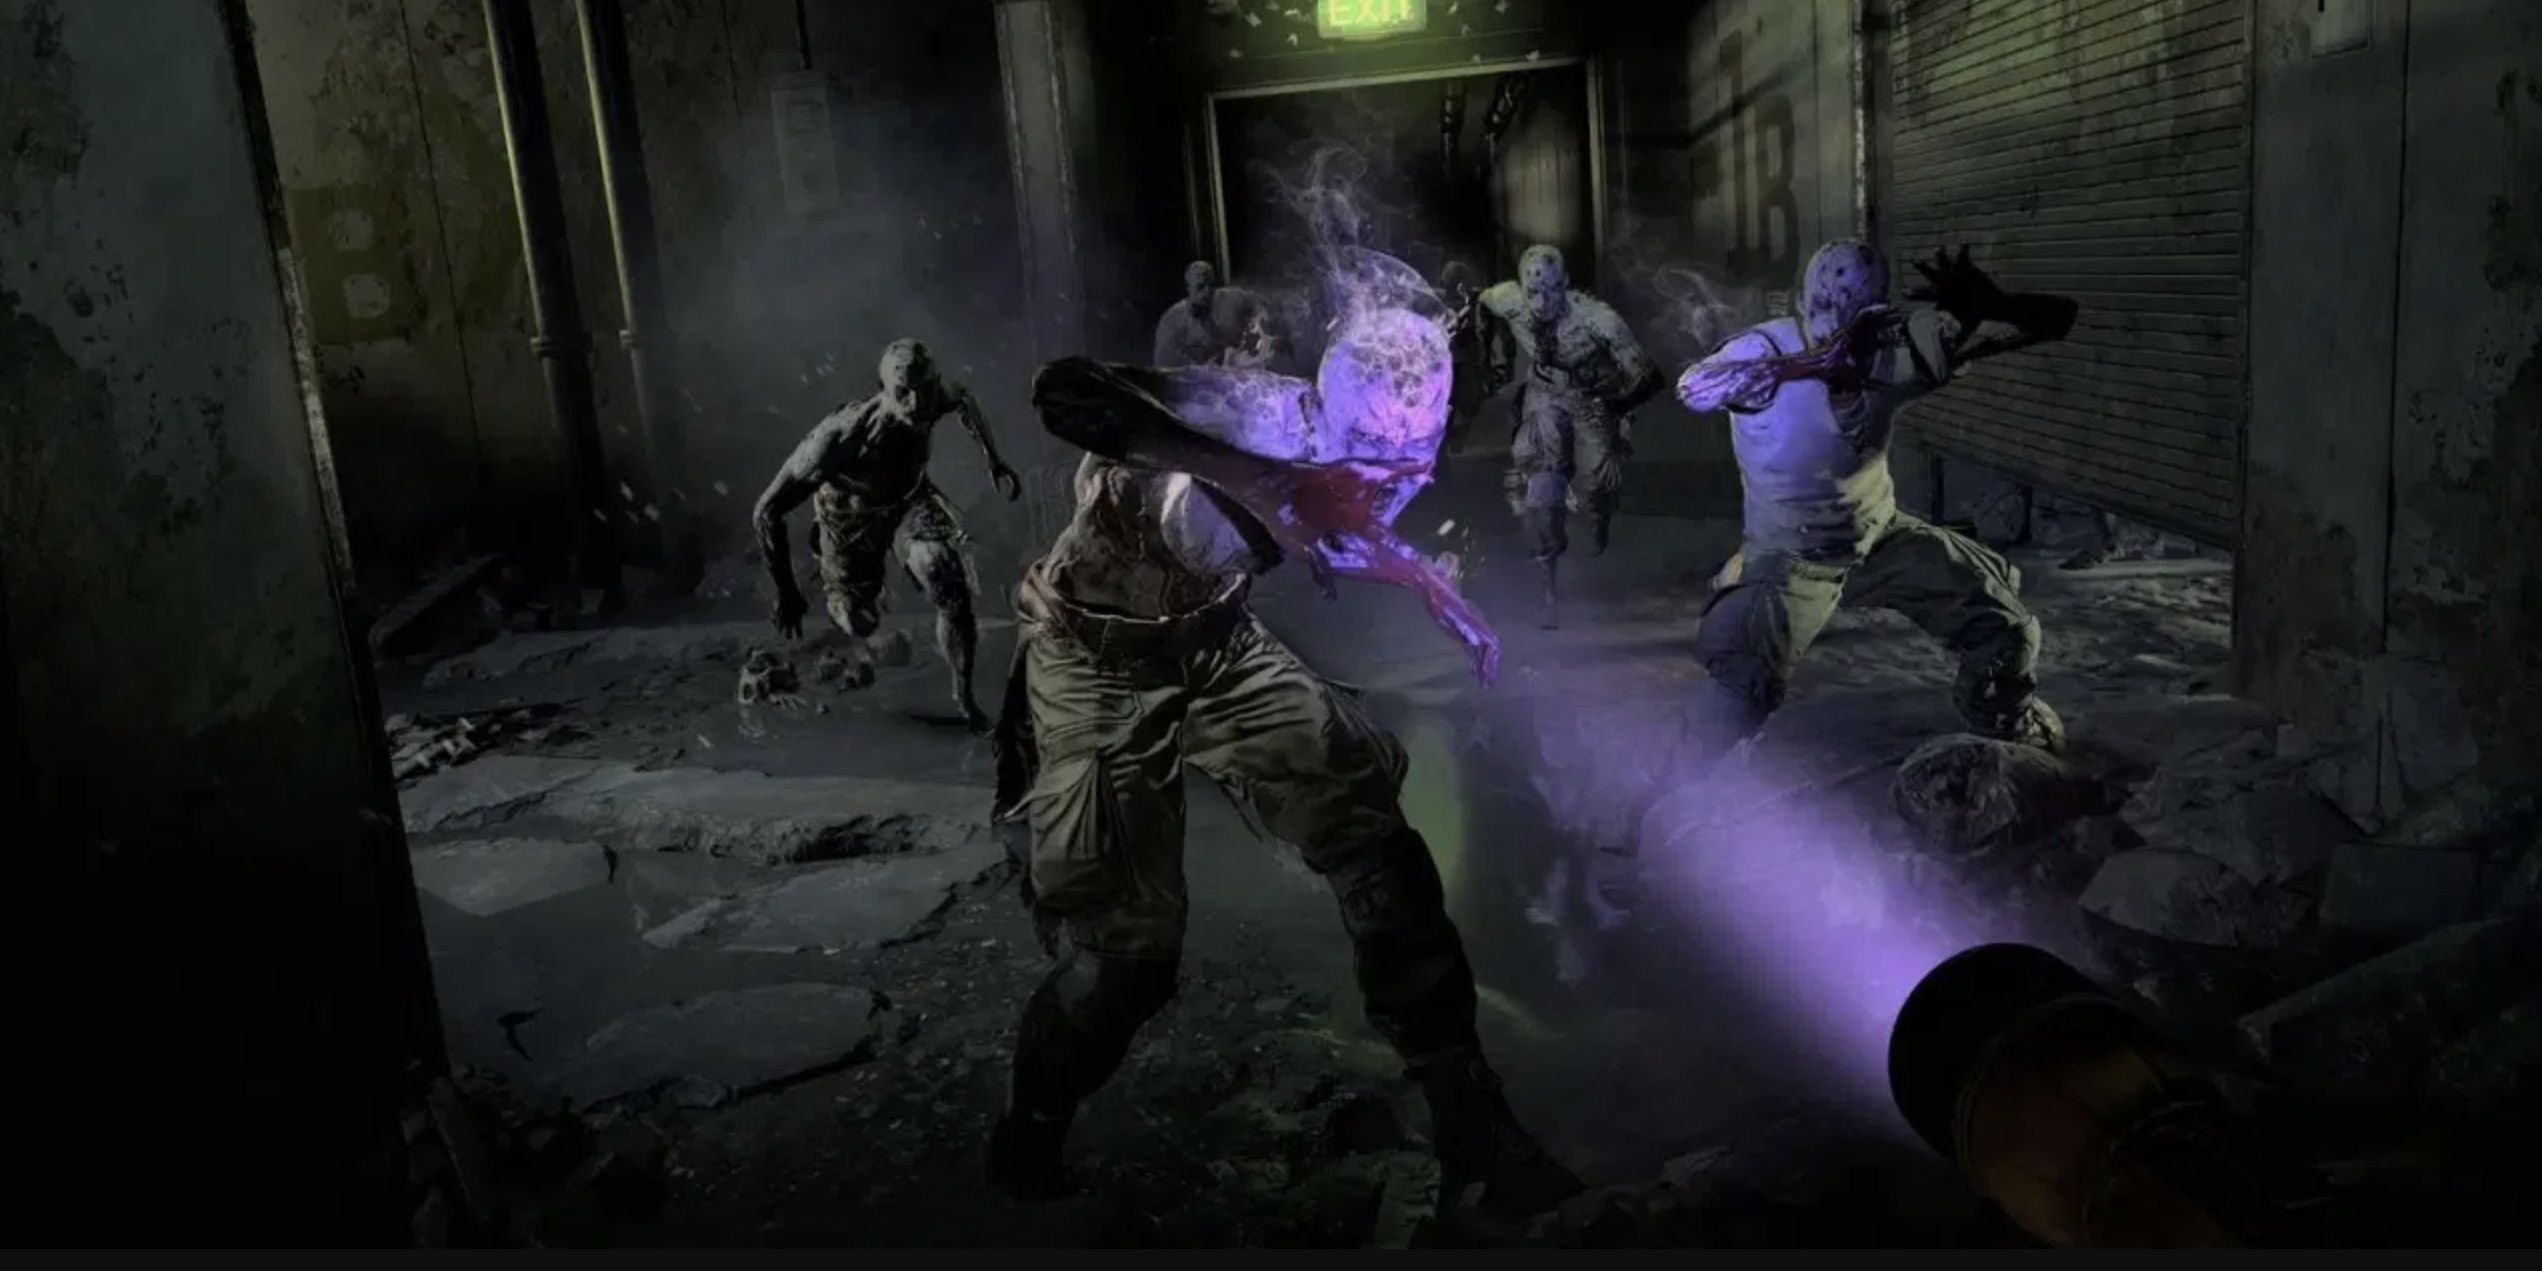 dying light 2 player using uv light to keep zombies away